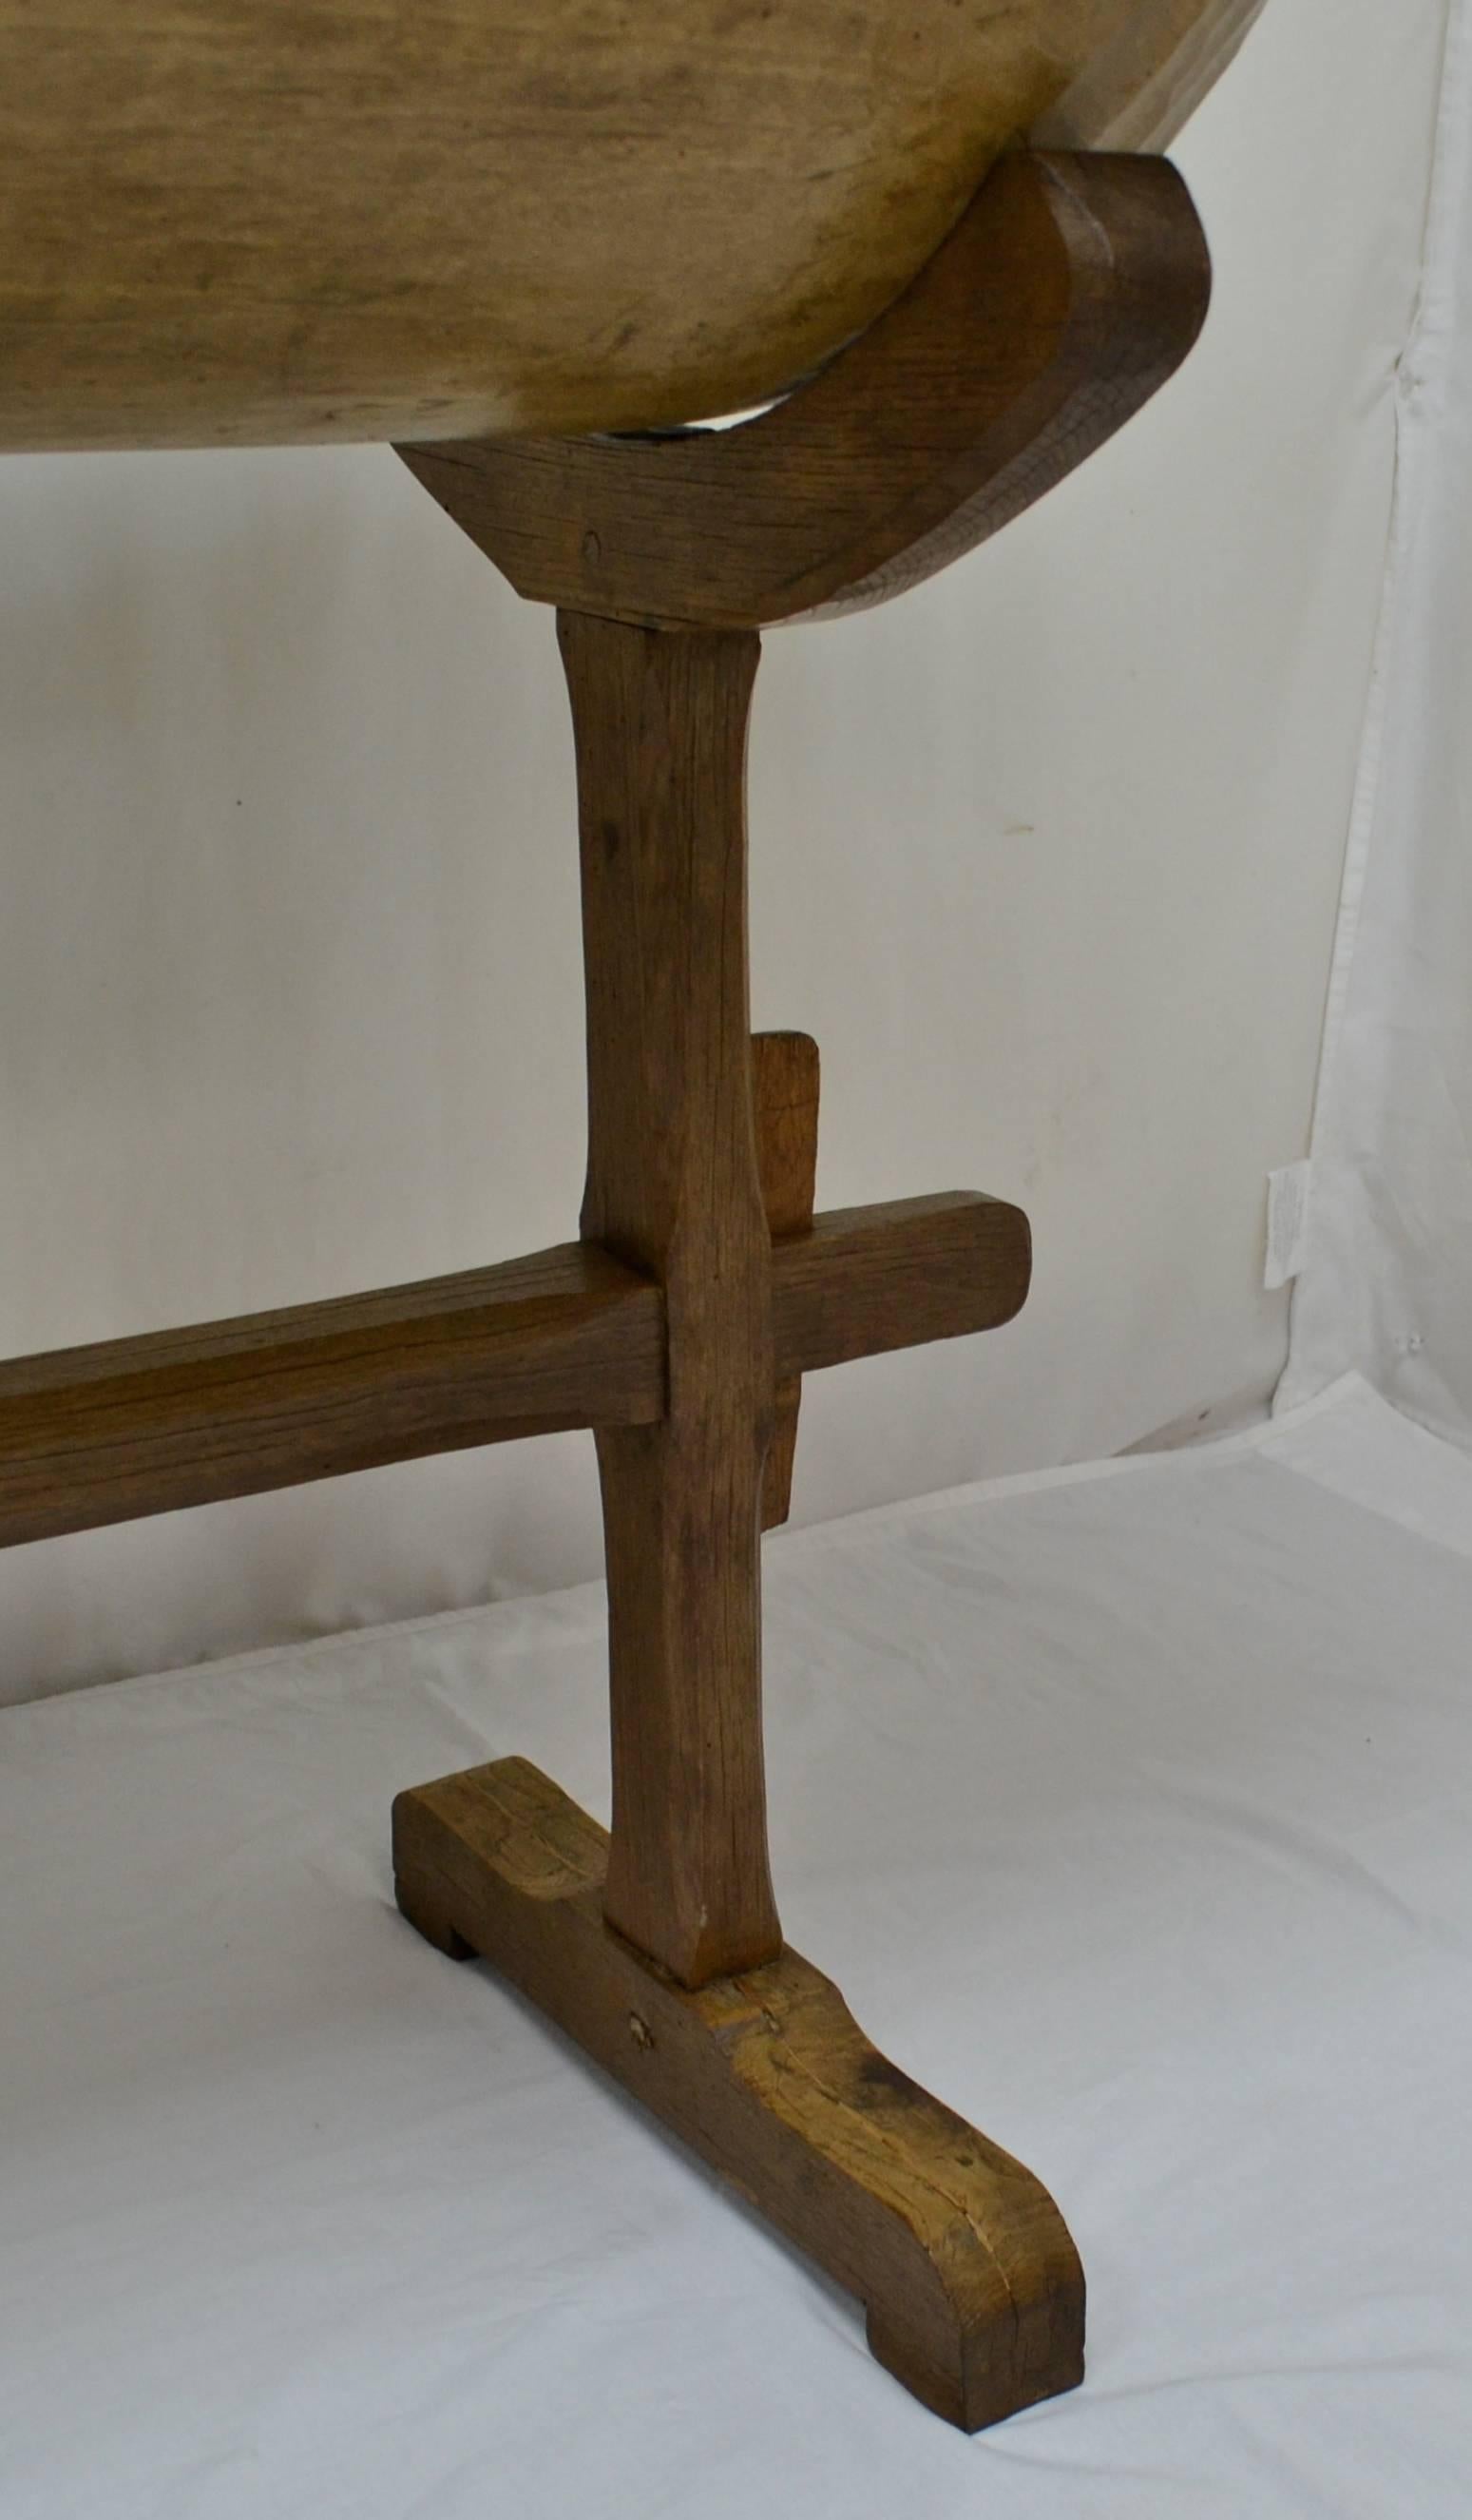 Country Huge Fruitwood Trog or Dough Bowl with Oak Stand